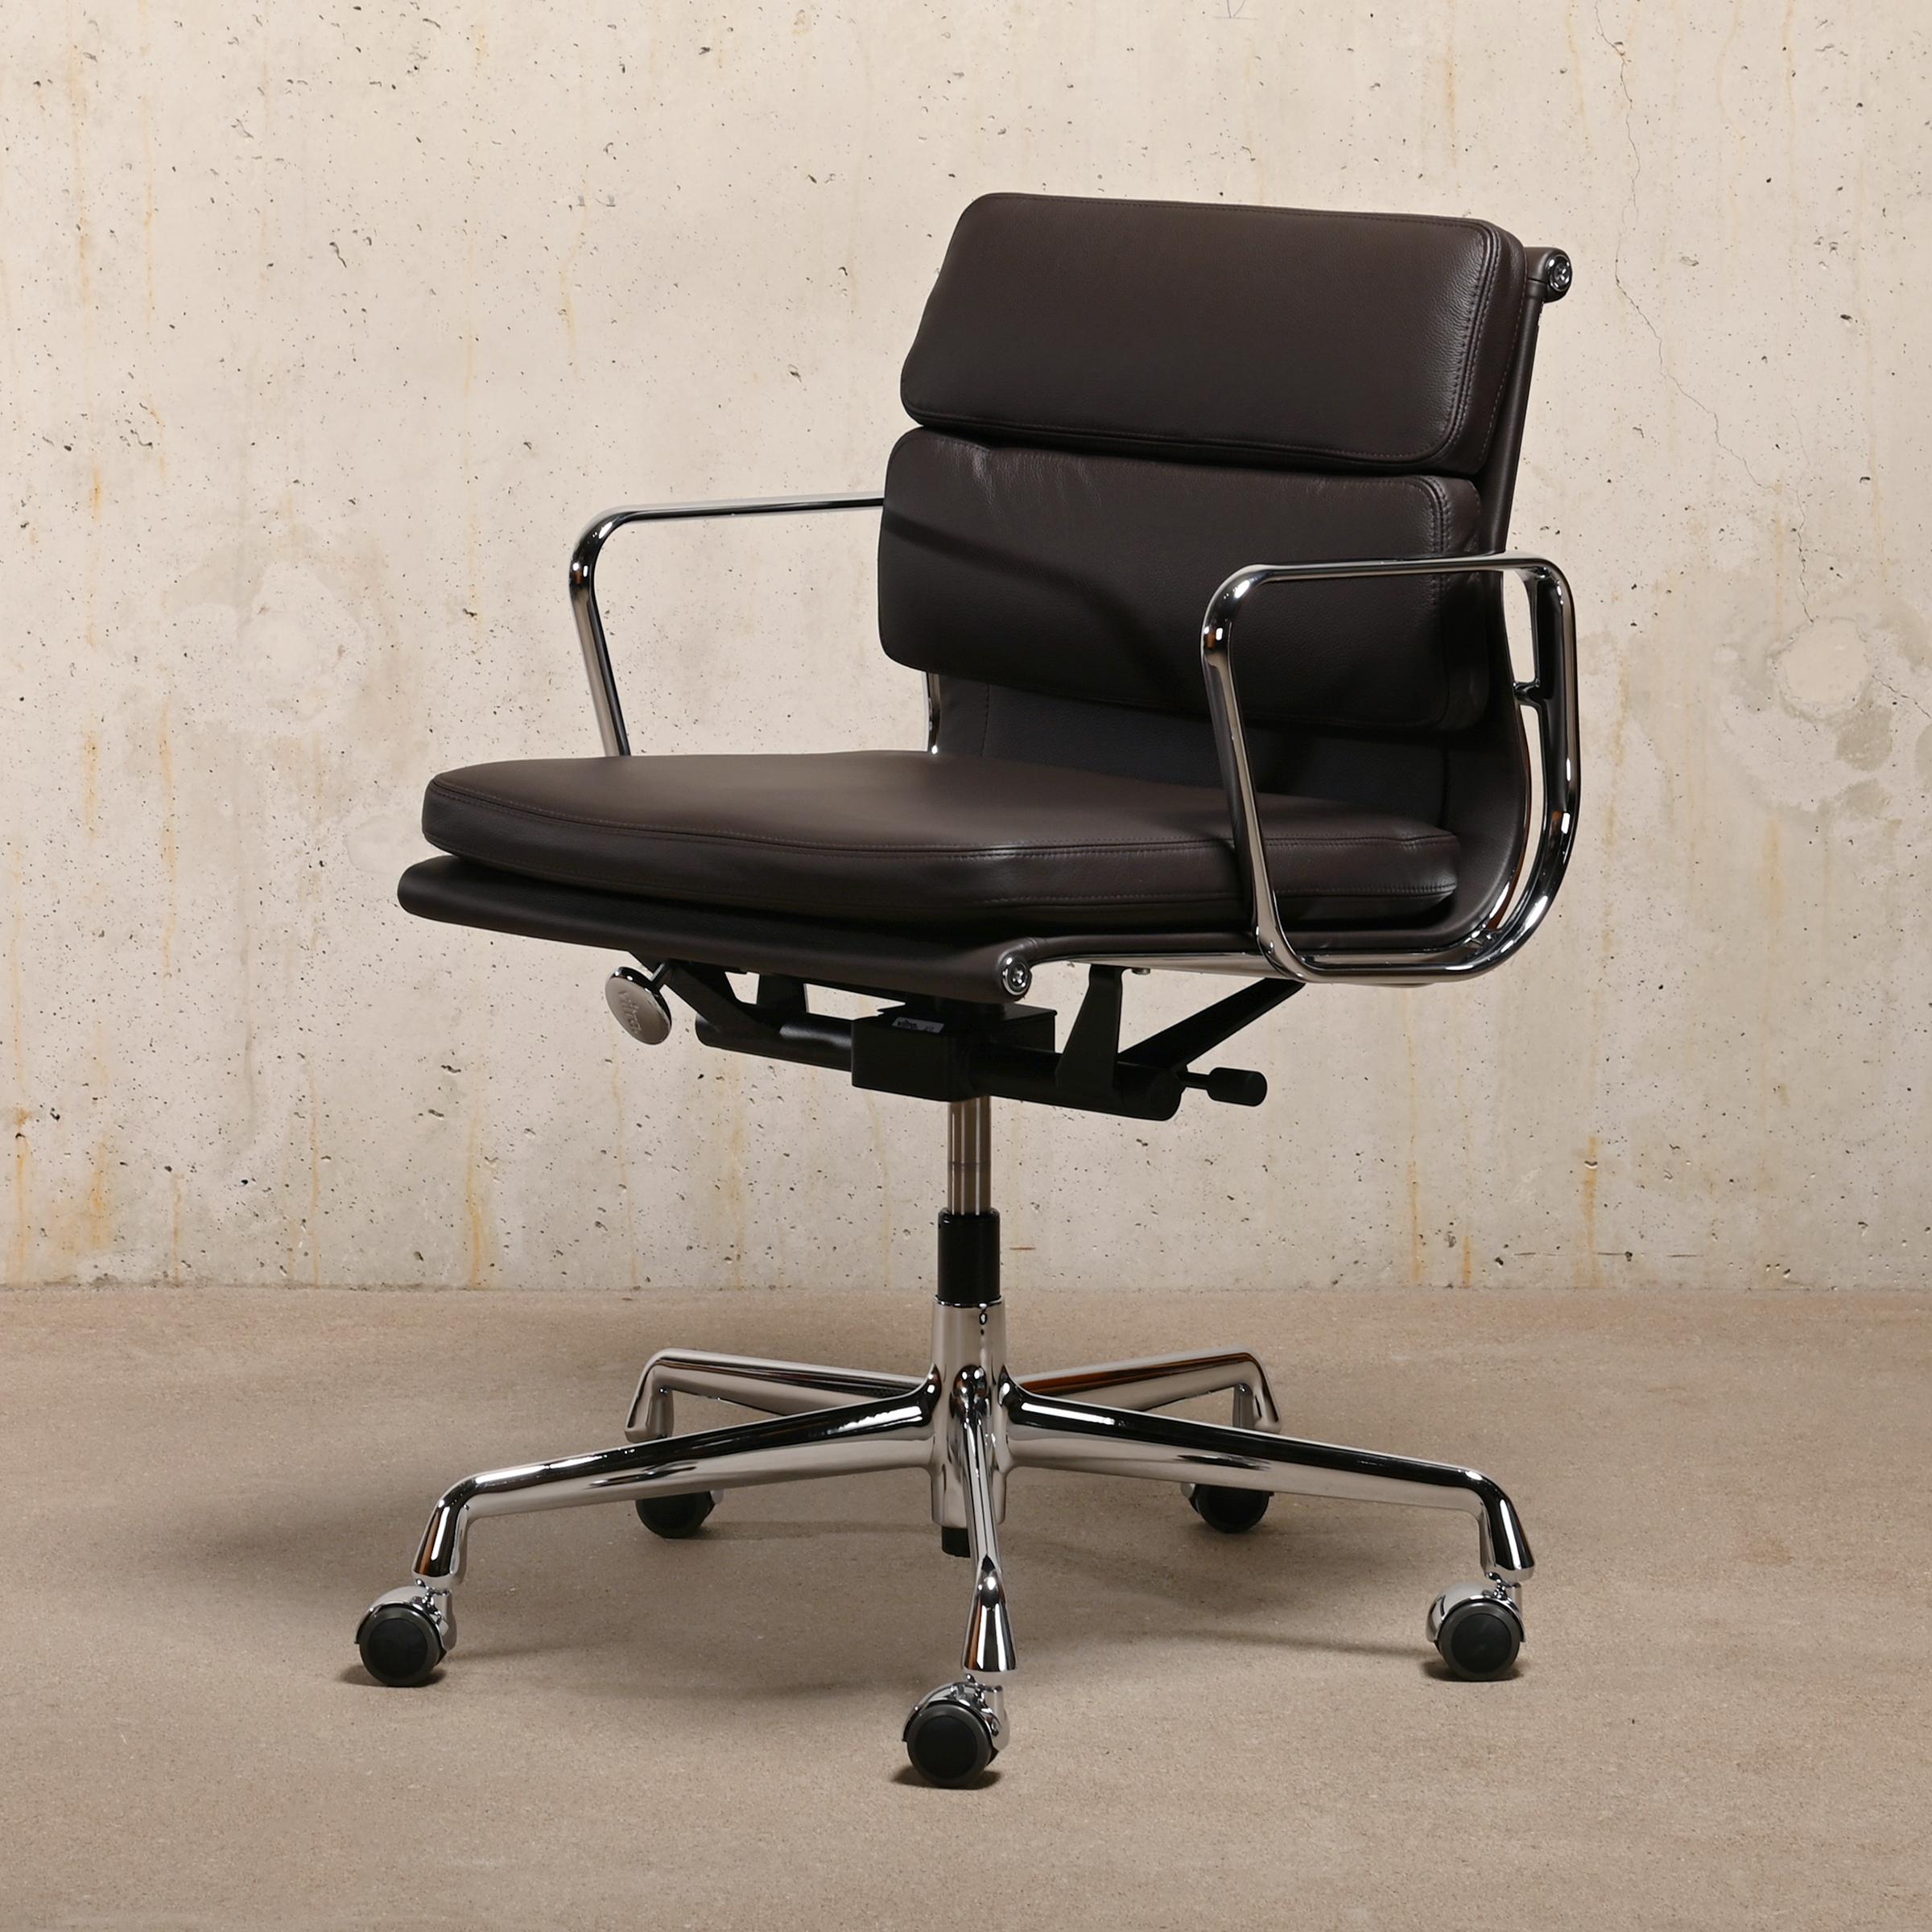 Charles & Ray Eames EA217 Office Chair in Chocolate Brown Leather, Vitra For Sale 1